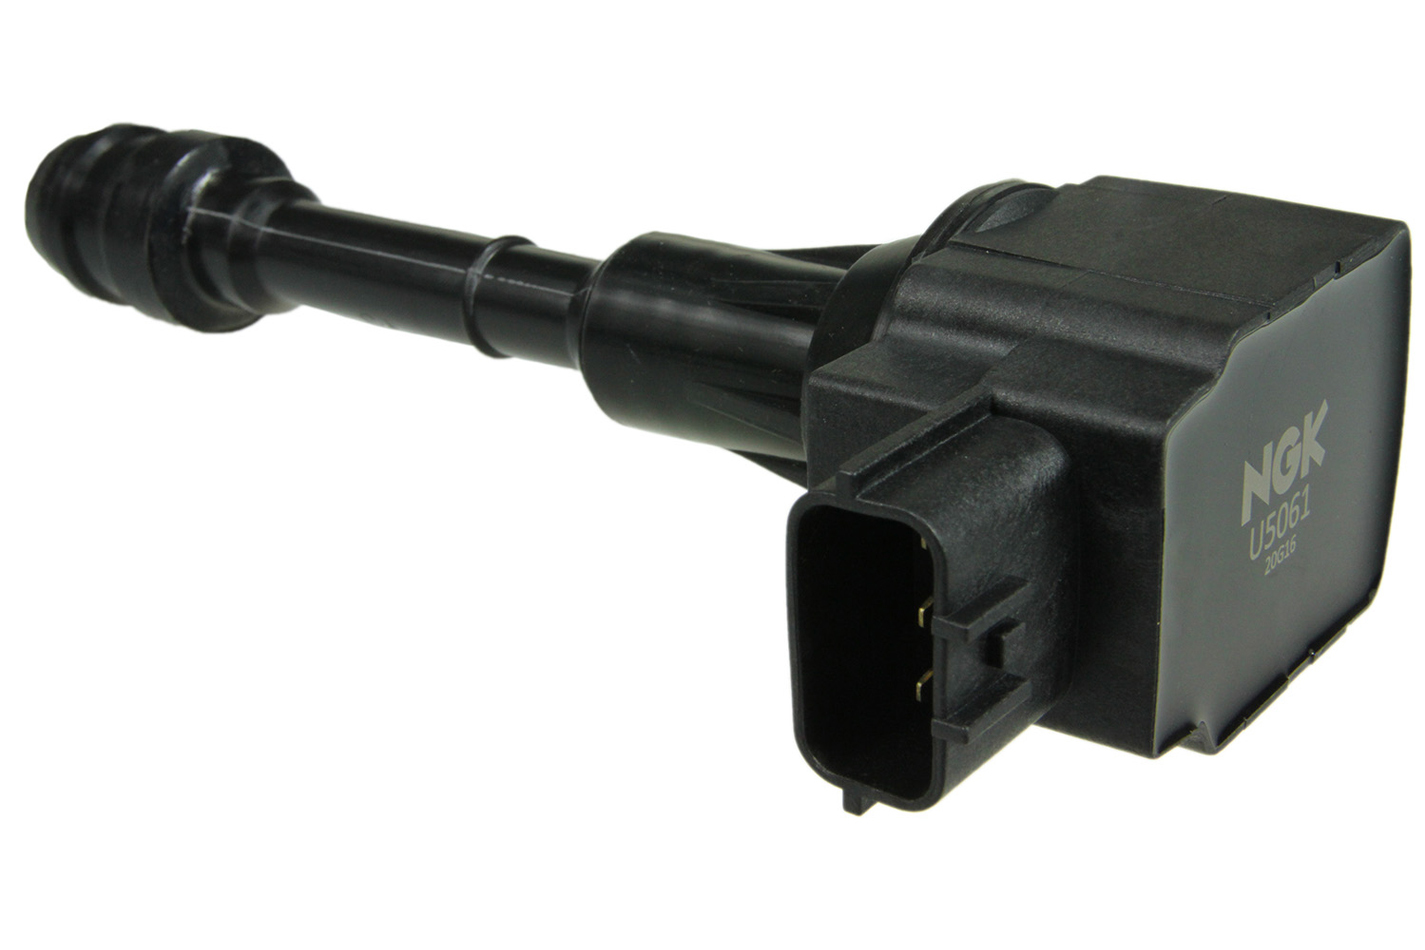 NGK U5061 Ignition Coil Pack, Coil-On-Plug, OE Specs, Black, Each